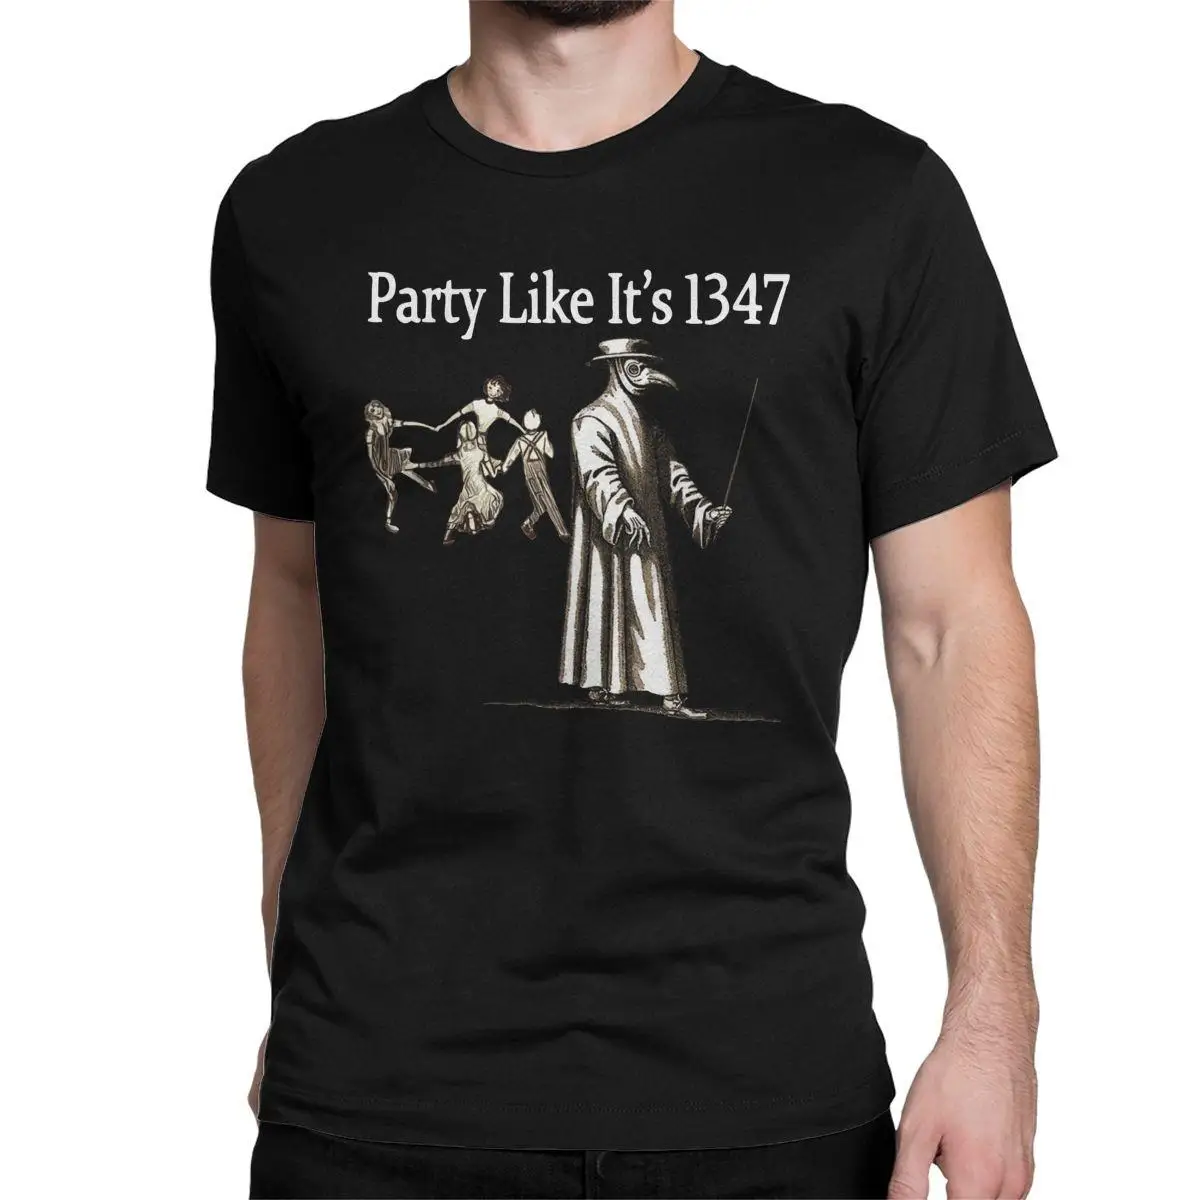 

Party Like It's 1347 Plague Doctor T Shirts Men's Pure Cotton Novelty T-Shirt Streetwear Raven Vintage Tees Tops Gift Idea